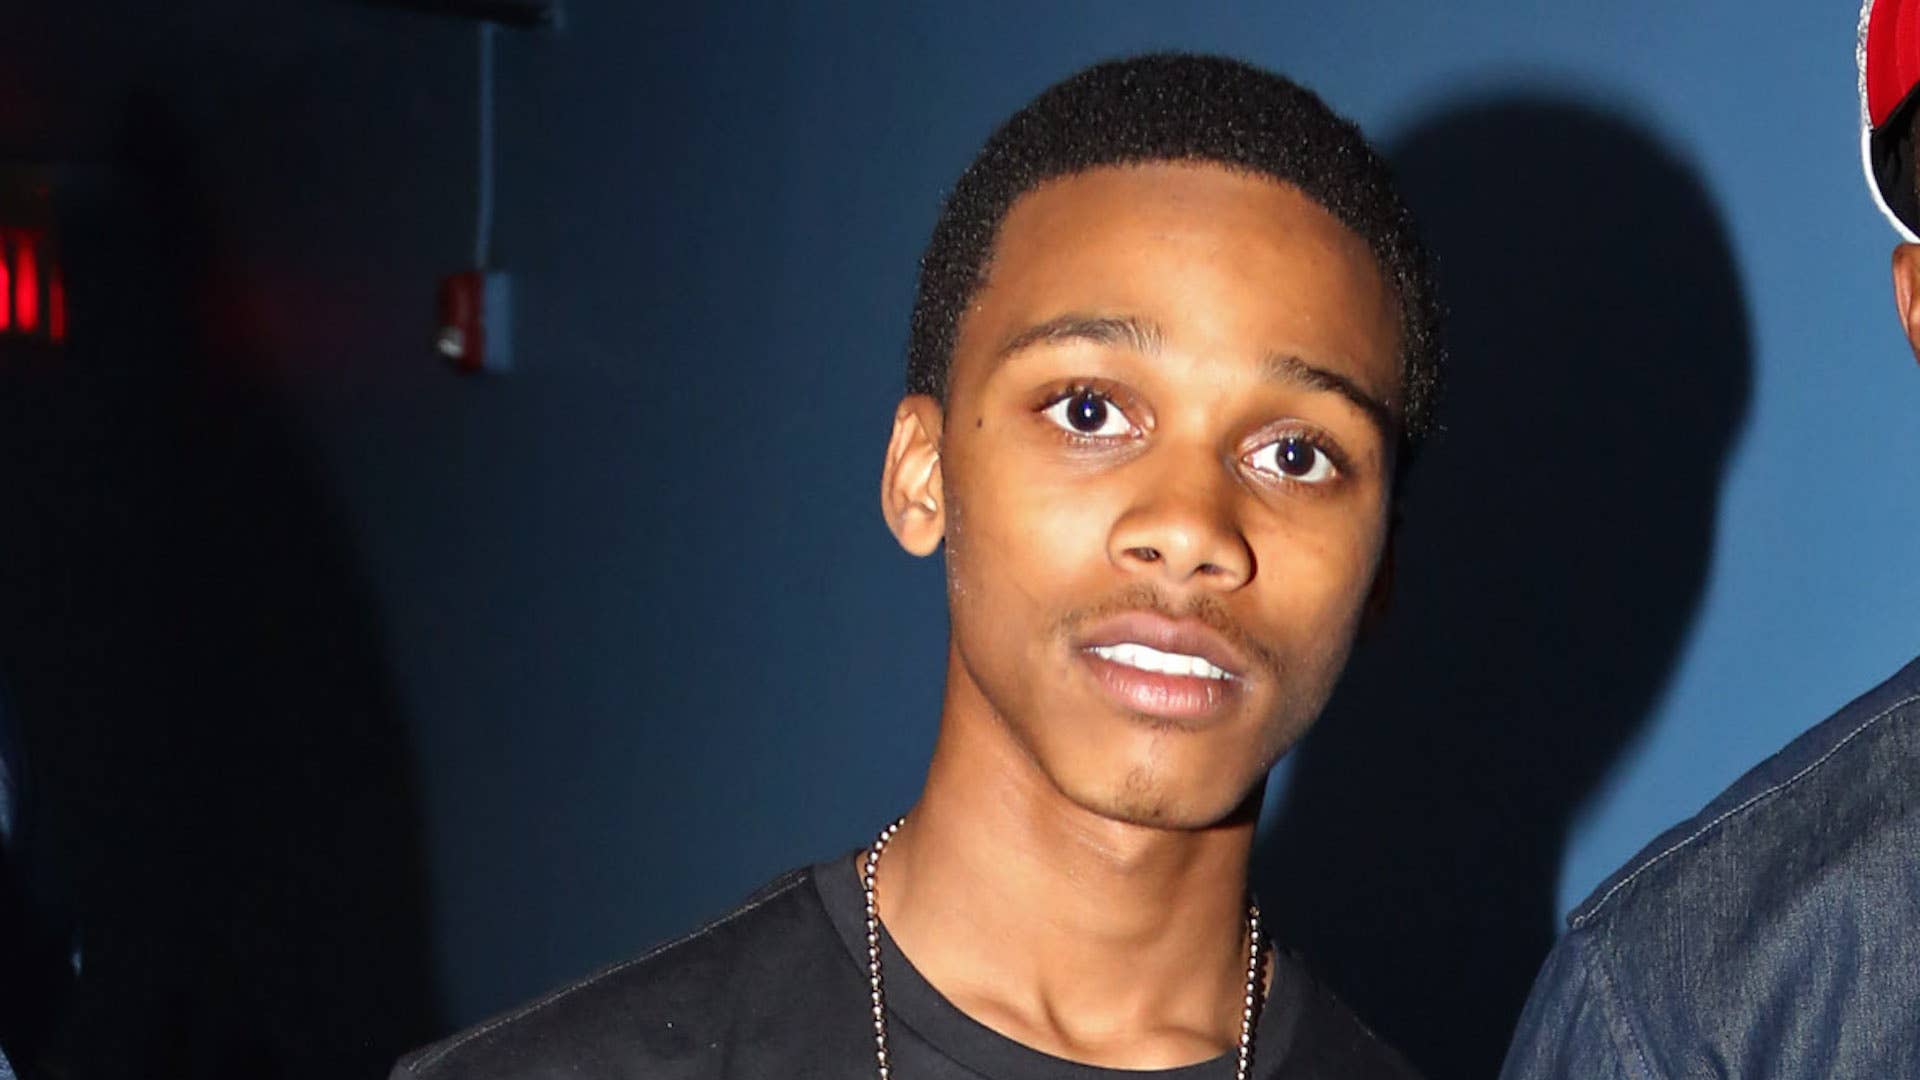 Recording artist Lil Snupe